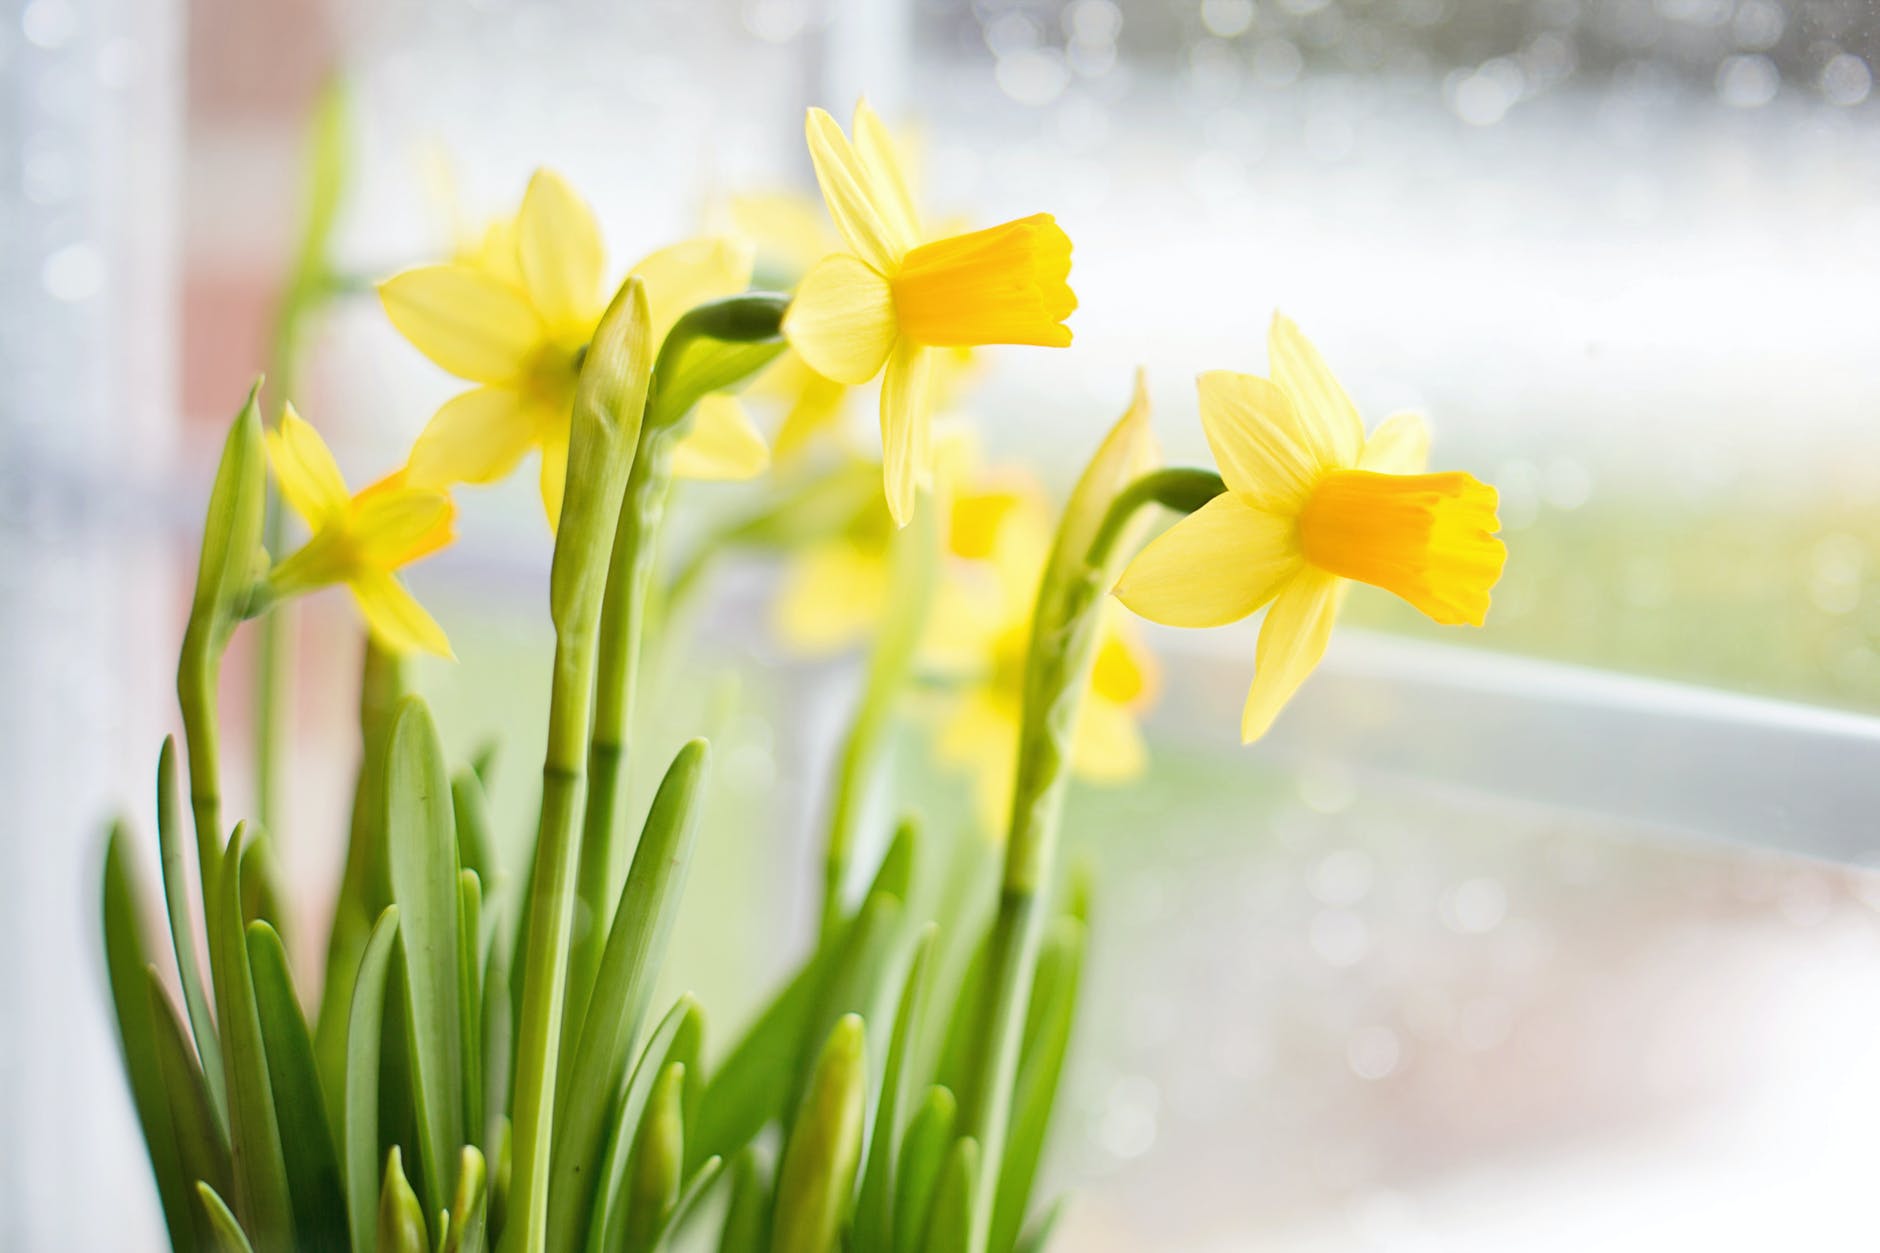 How to Grow and Care for Daffodils?